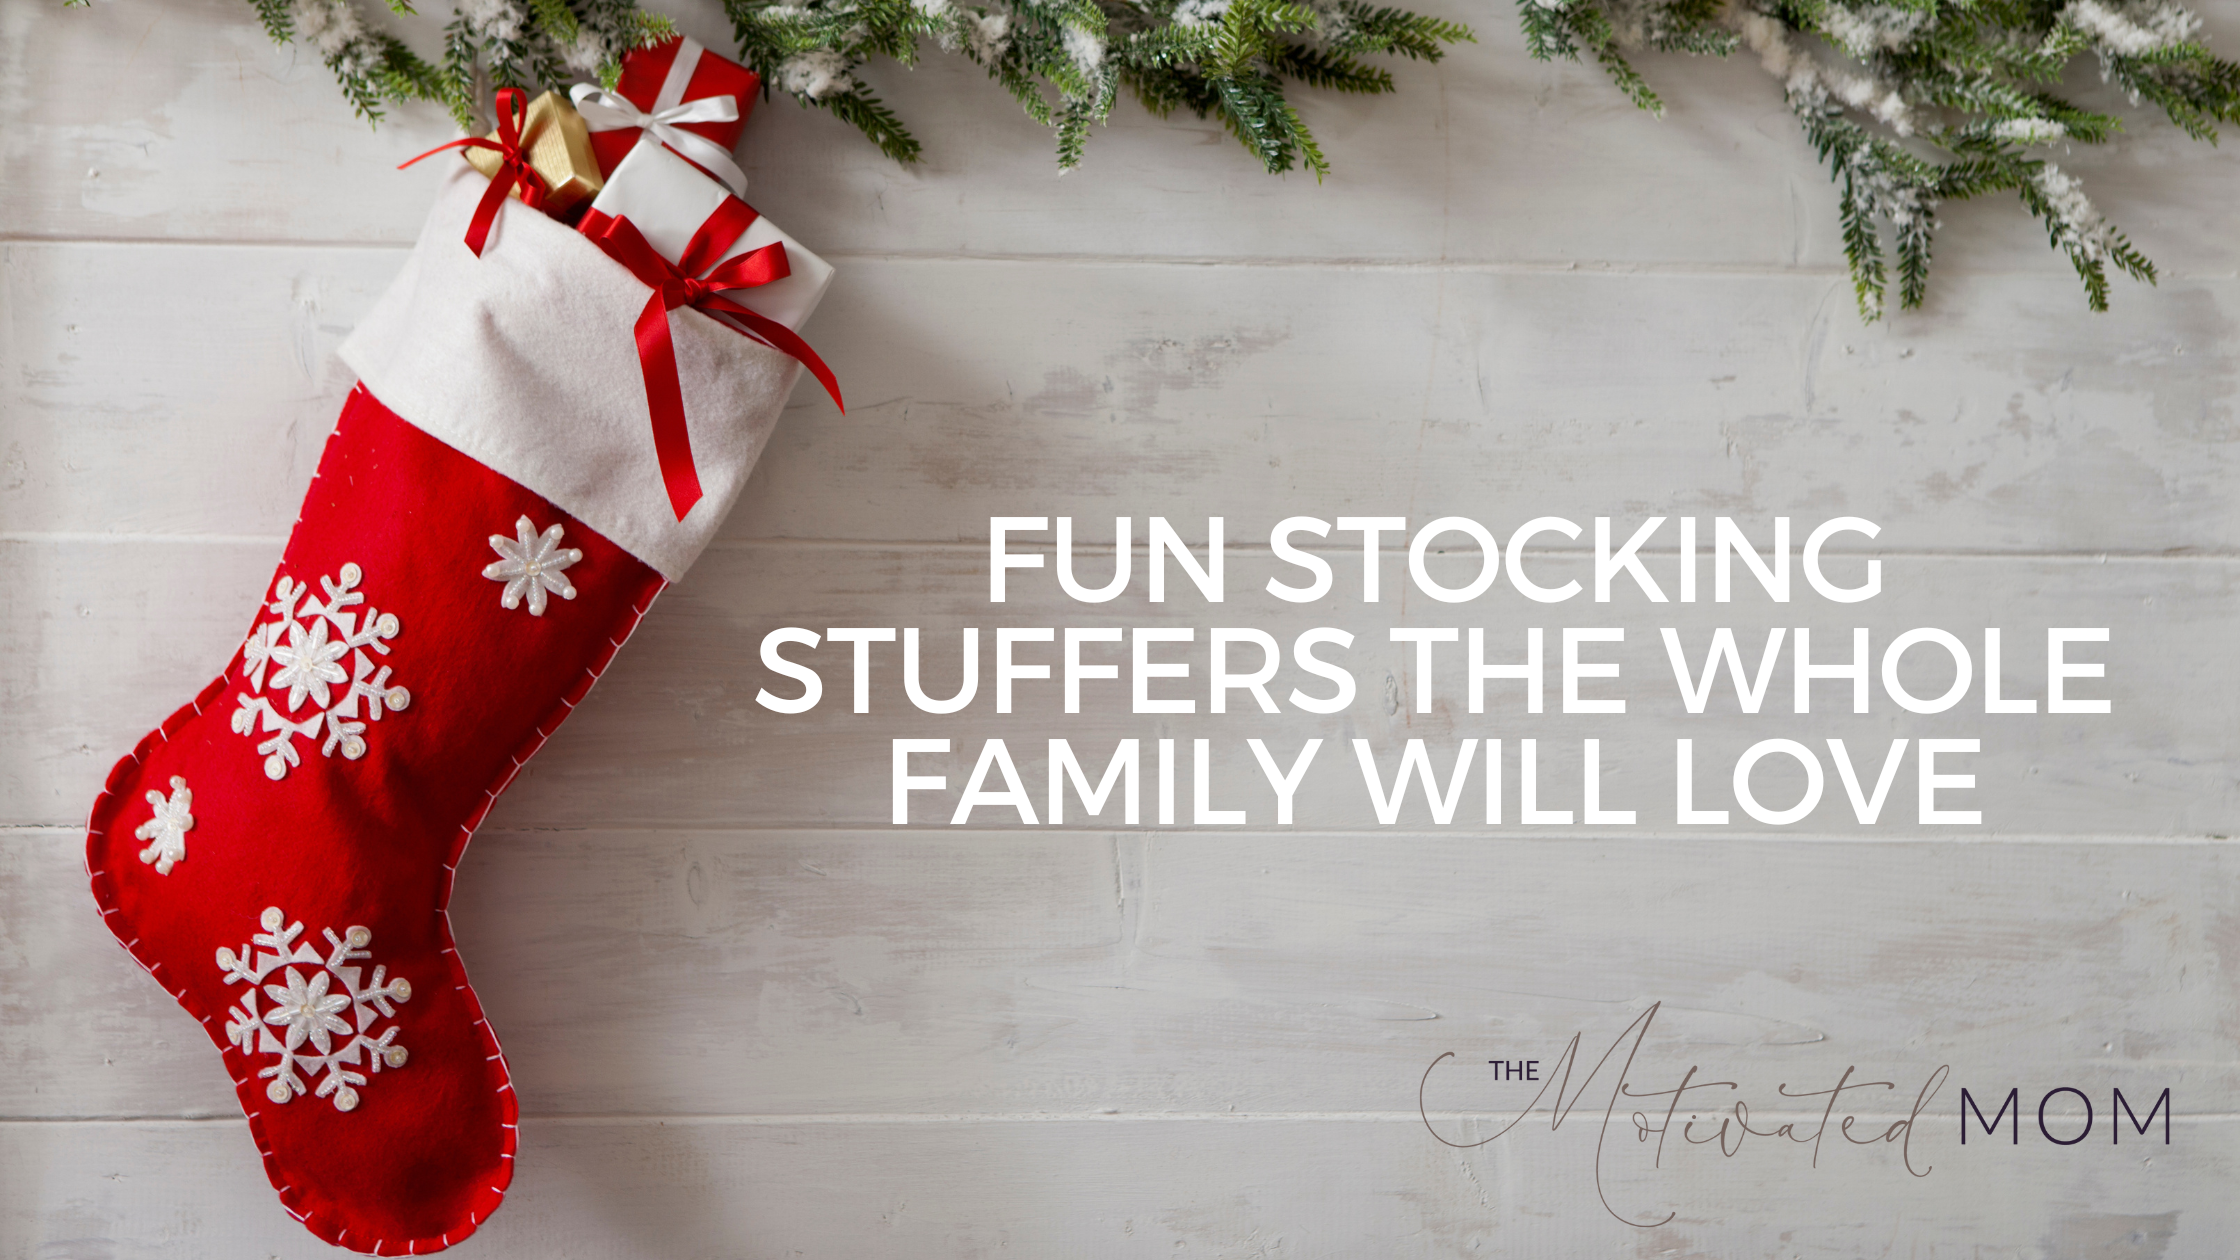 Fun Stocking Stuffers The Whole Family Will Love - Motivated Mom